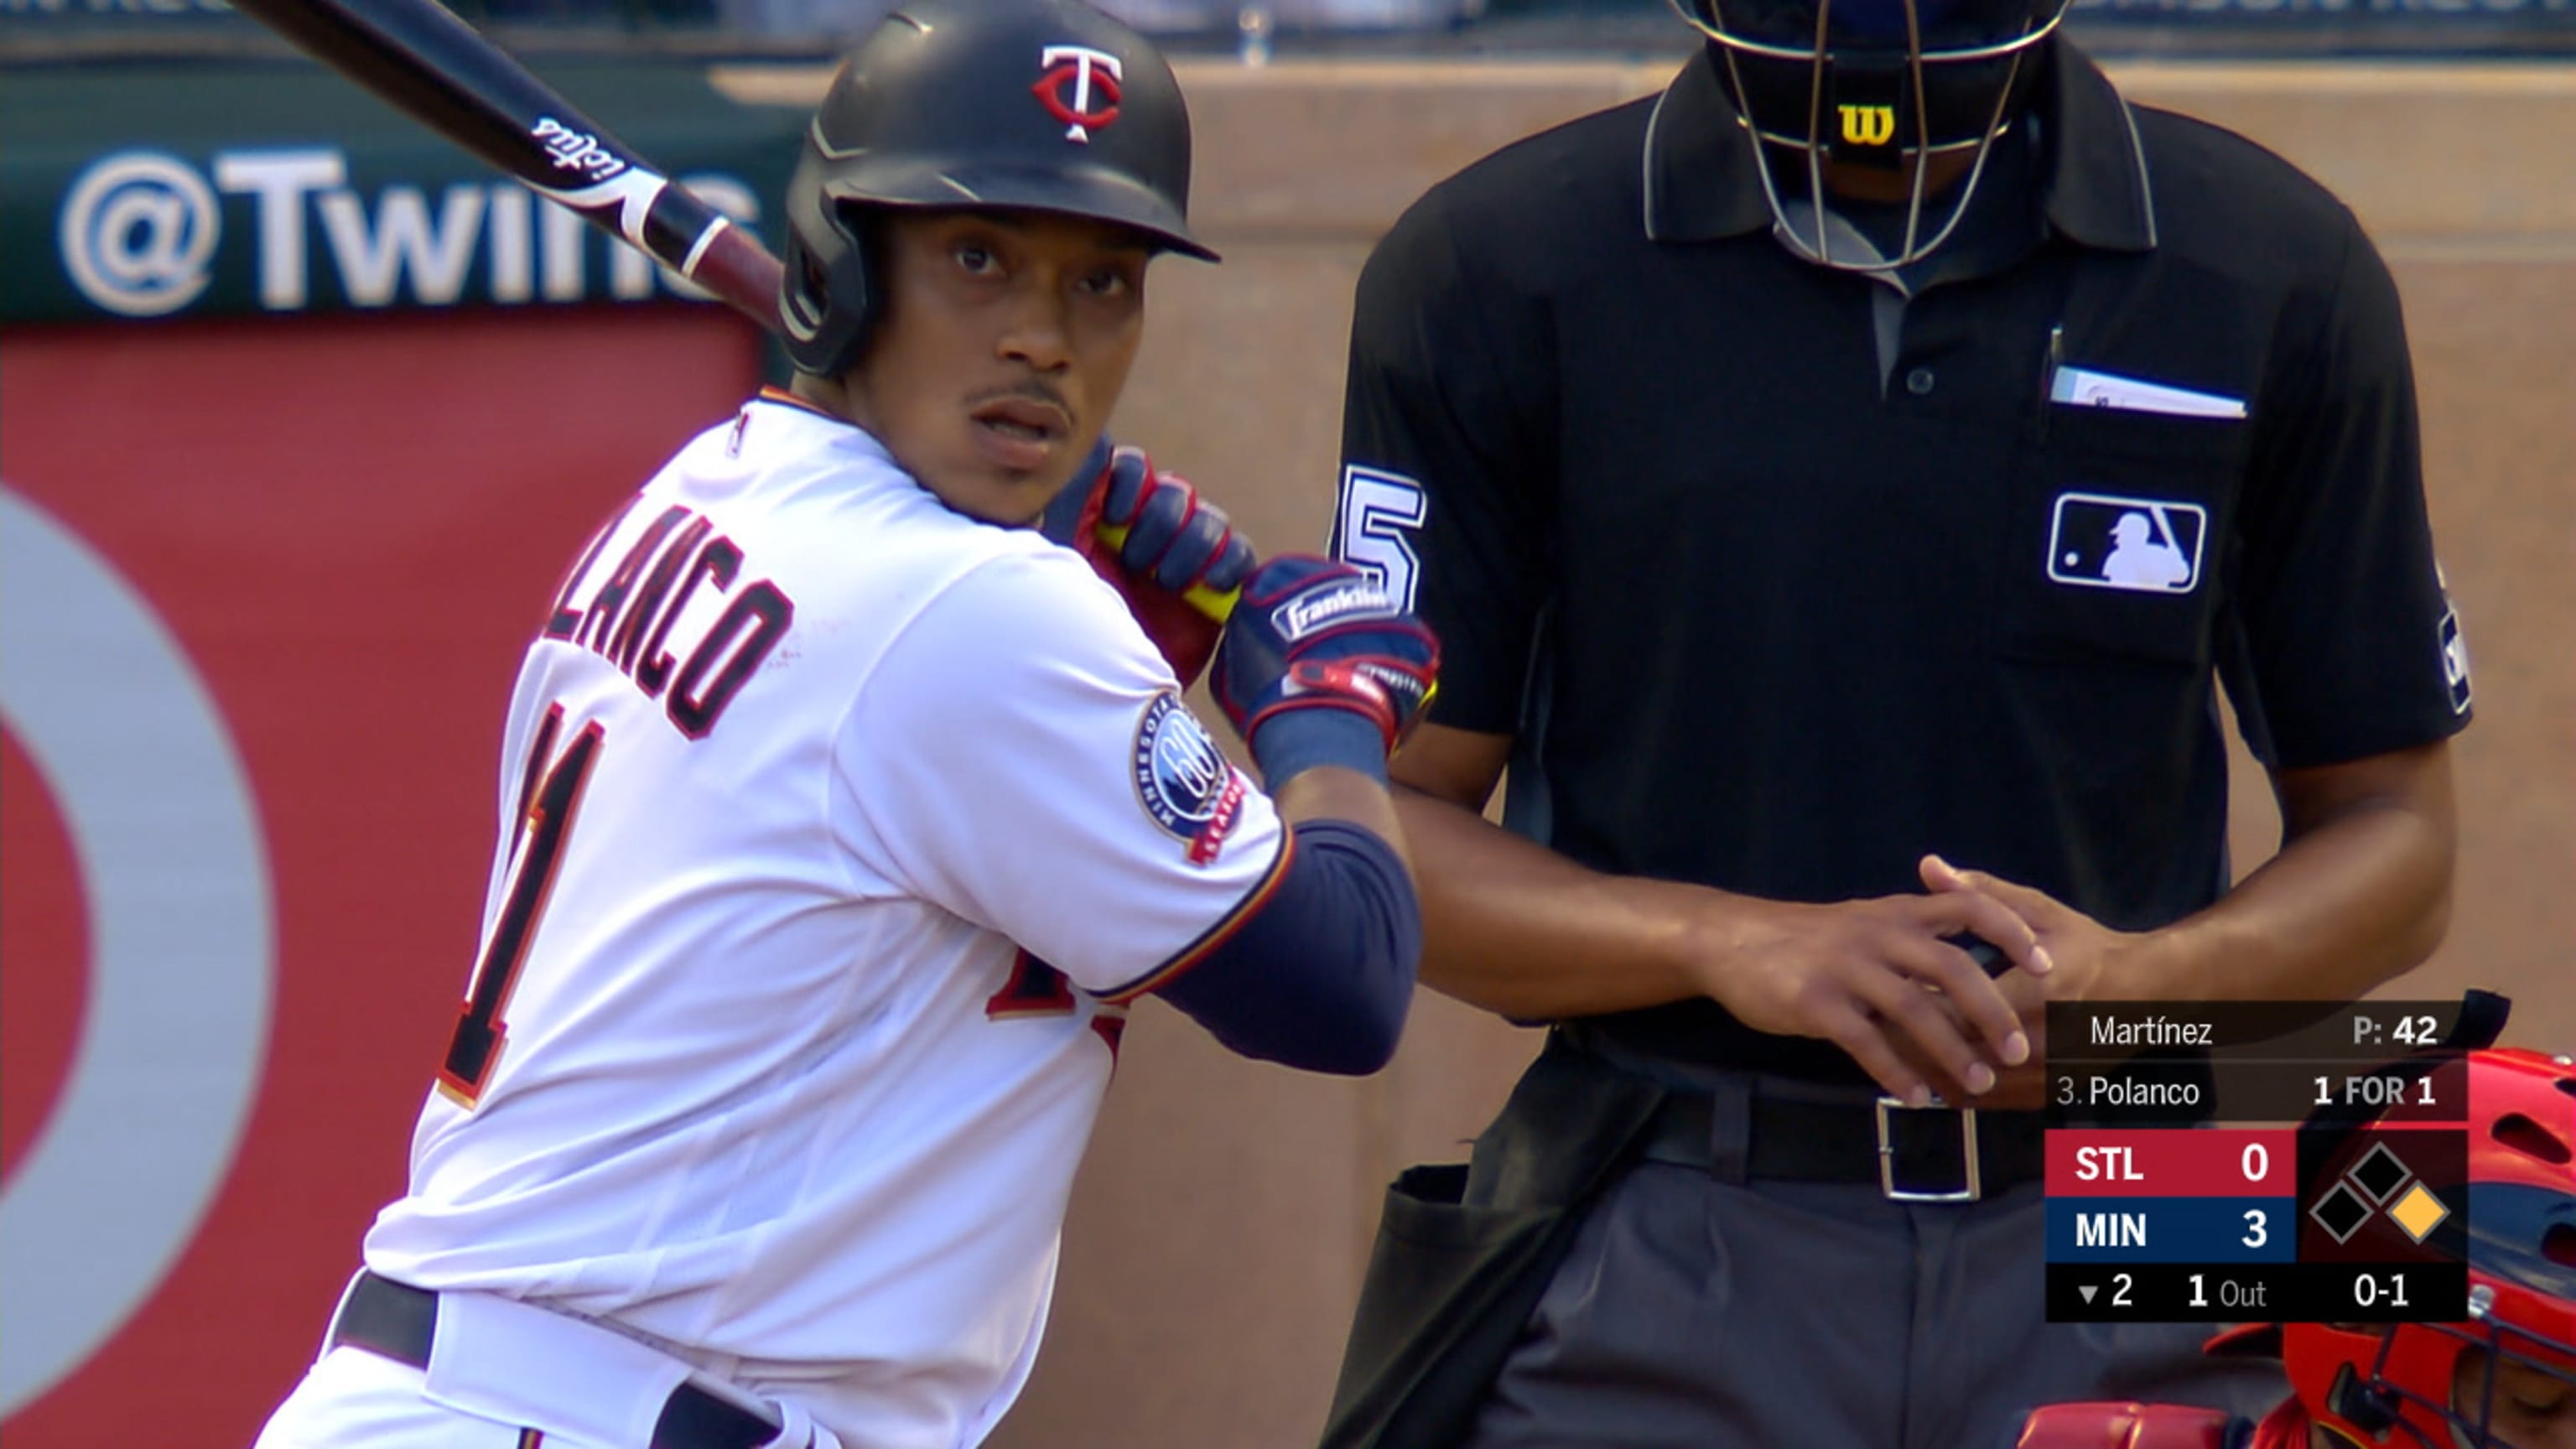 Polanco homers twice, Twins hit 5 HRs in 9-2 win over Royals